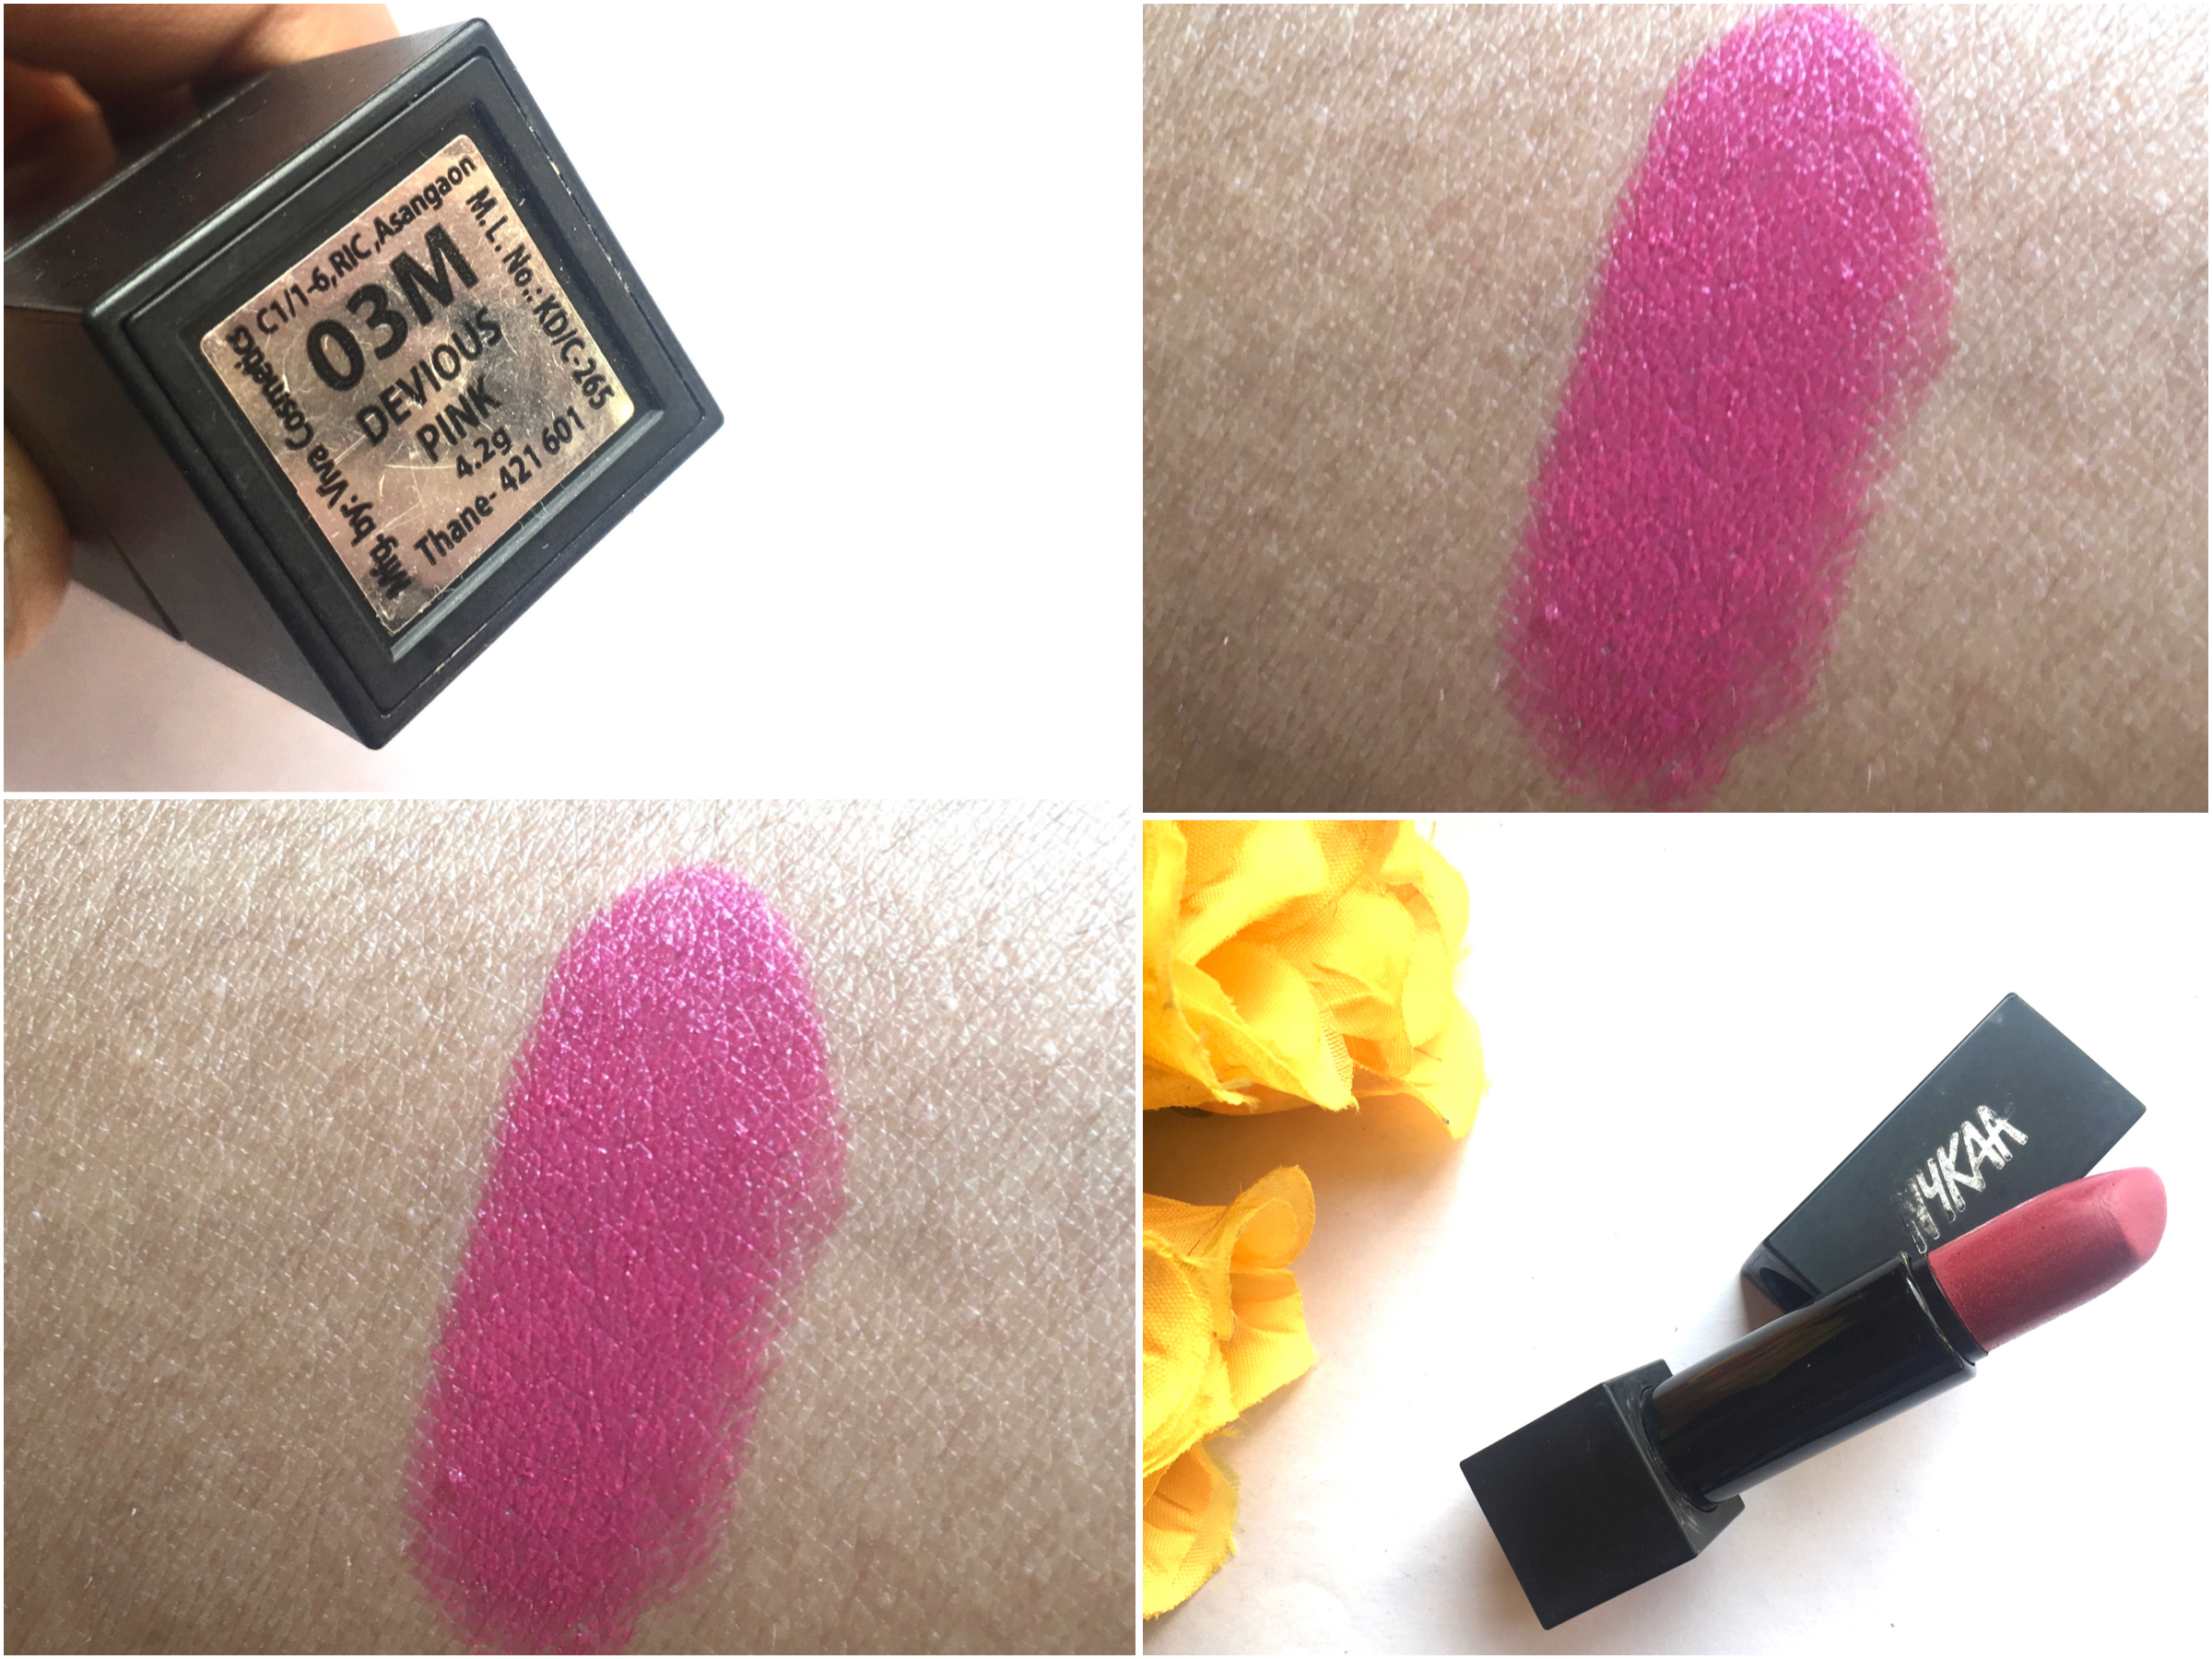 All Nykaa So Matte Lipsticks Review, Swatches